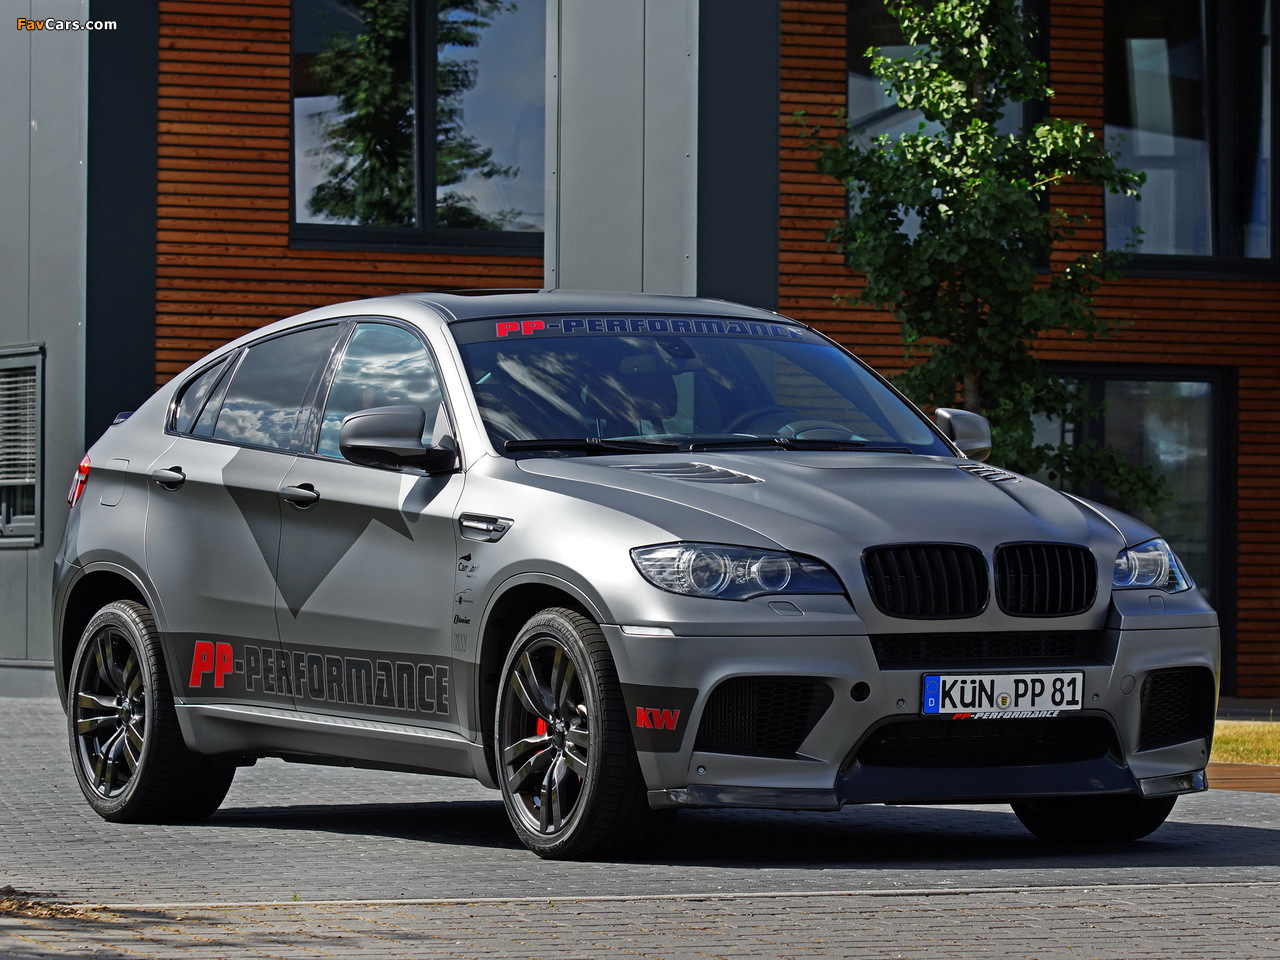 PP-Performance BMW X6 M (E71) 2013 wallpapers (1280 x 960)